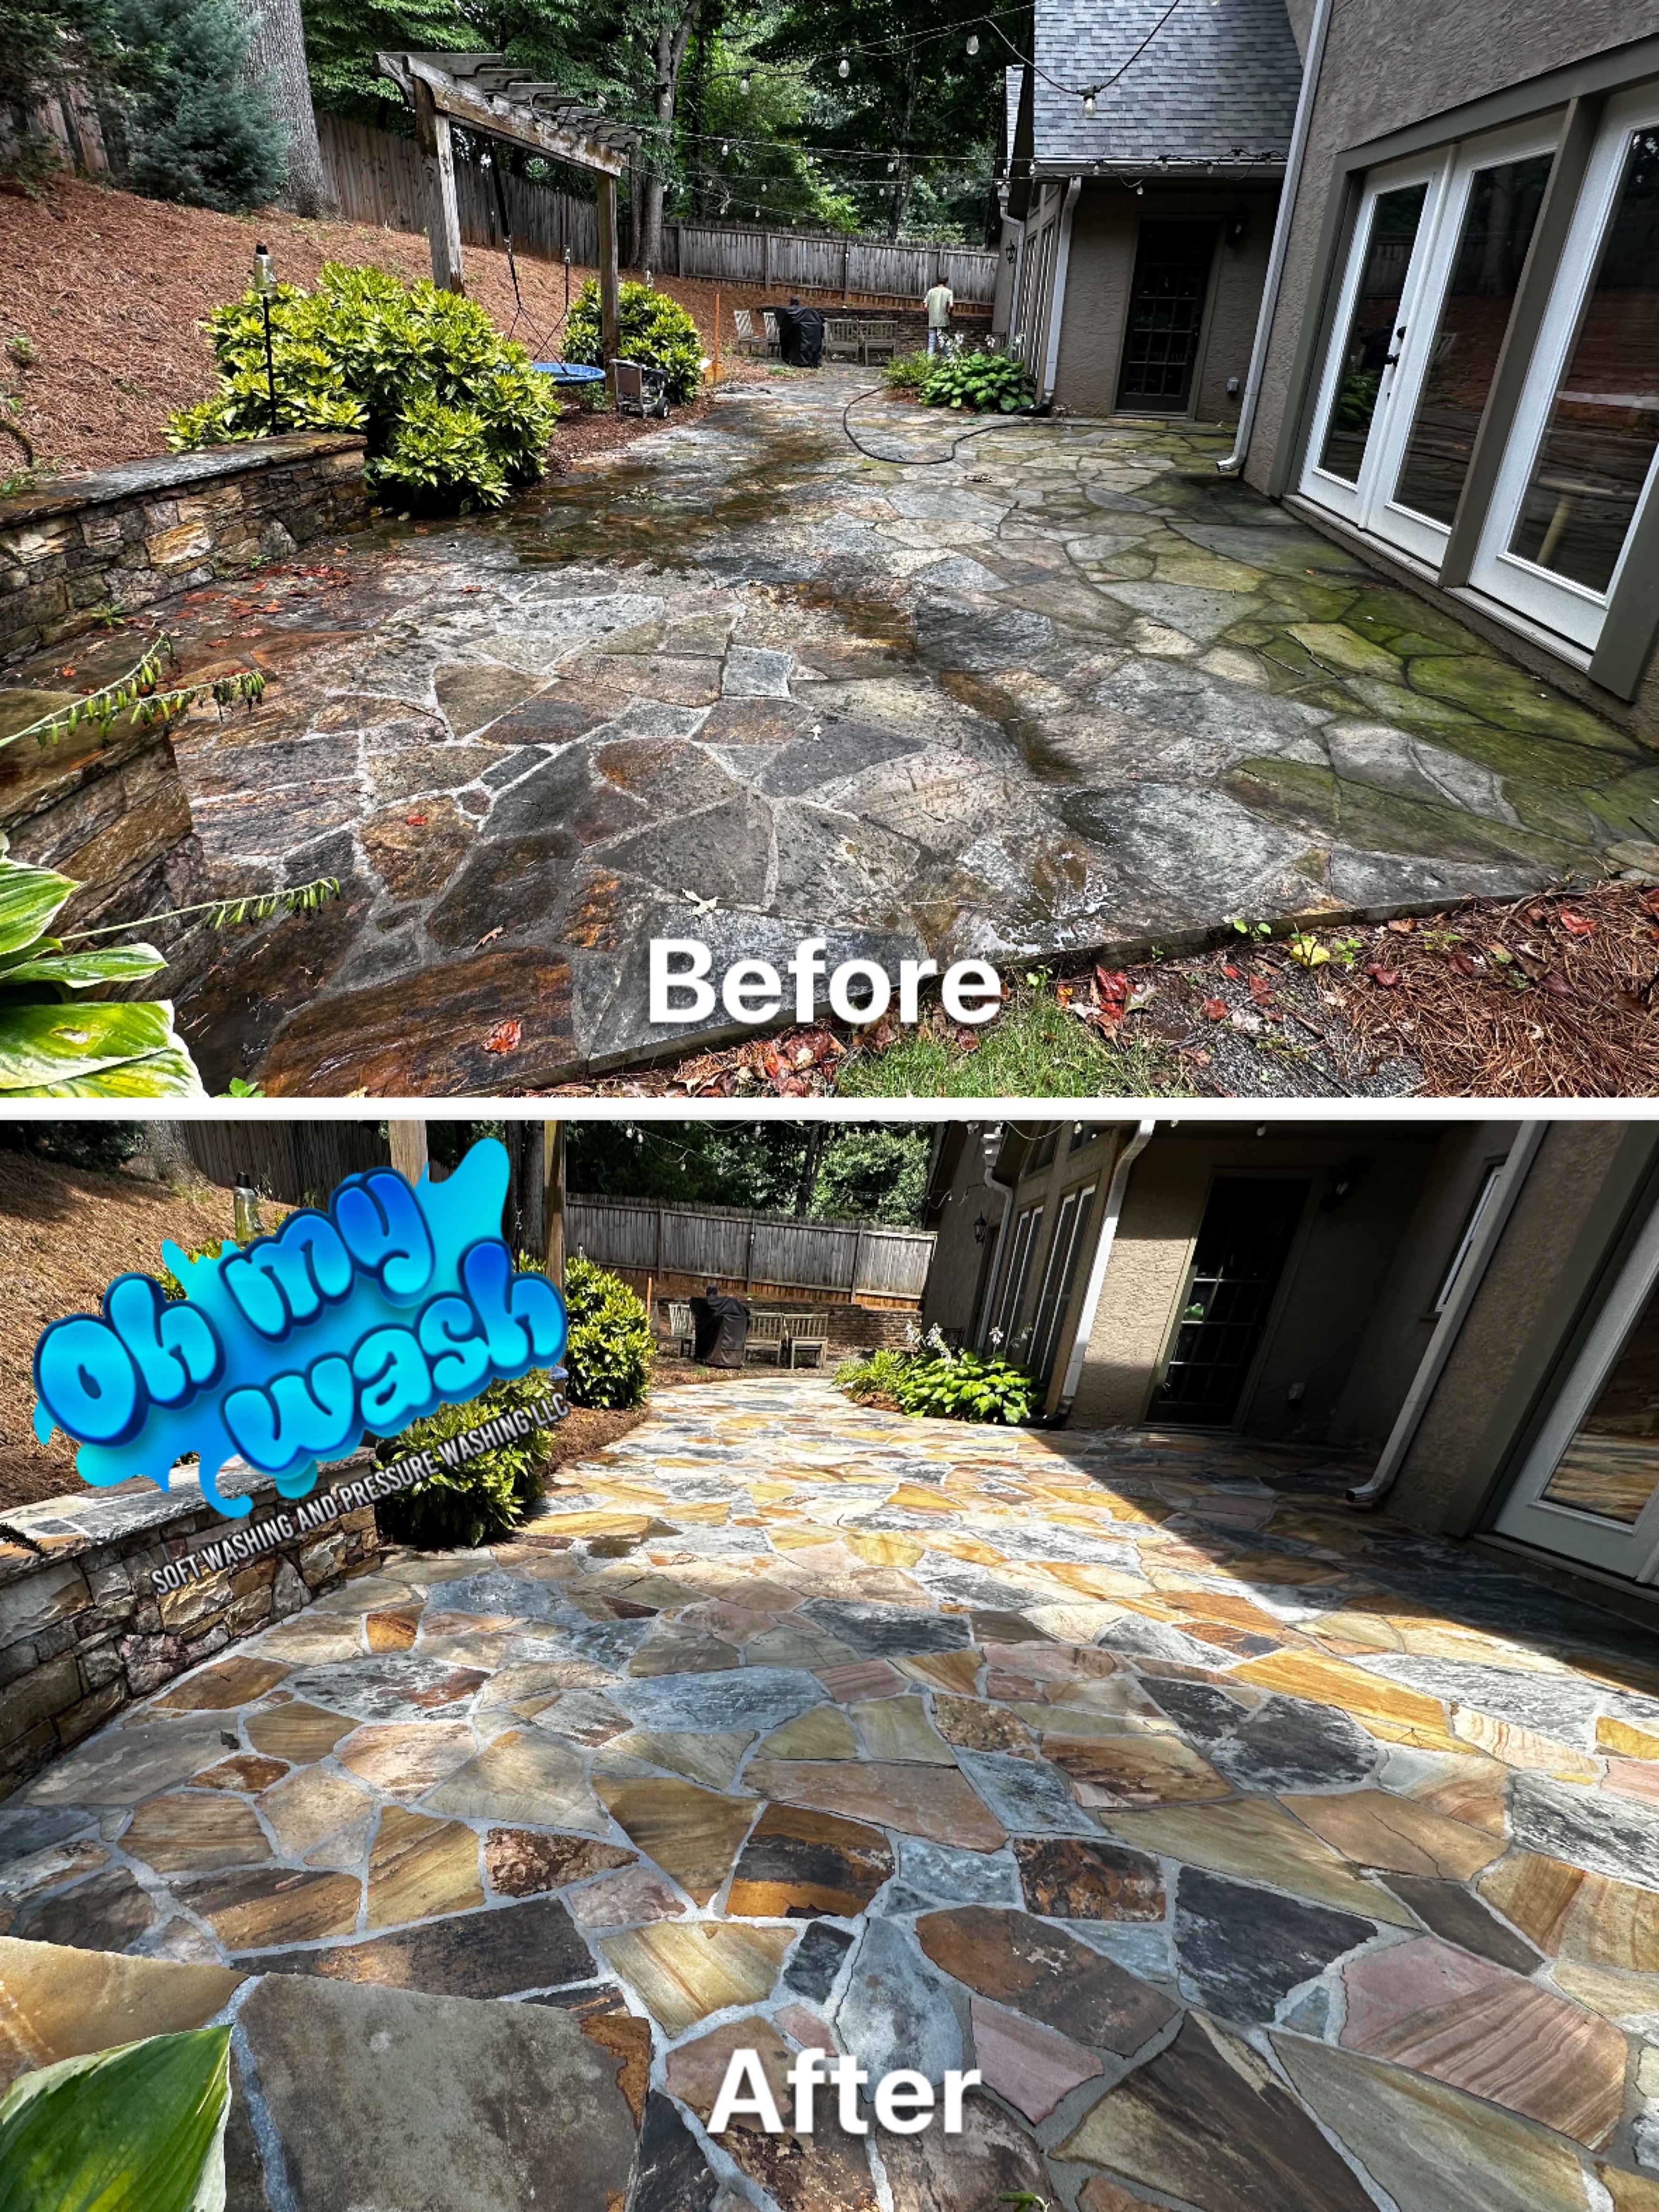 Enhance Your Acworth Home: Patio Cleaning with Oh My Wash!